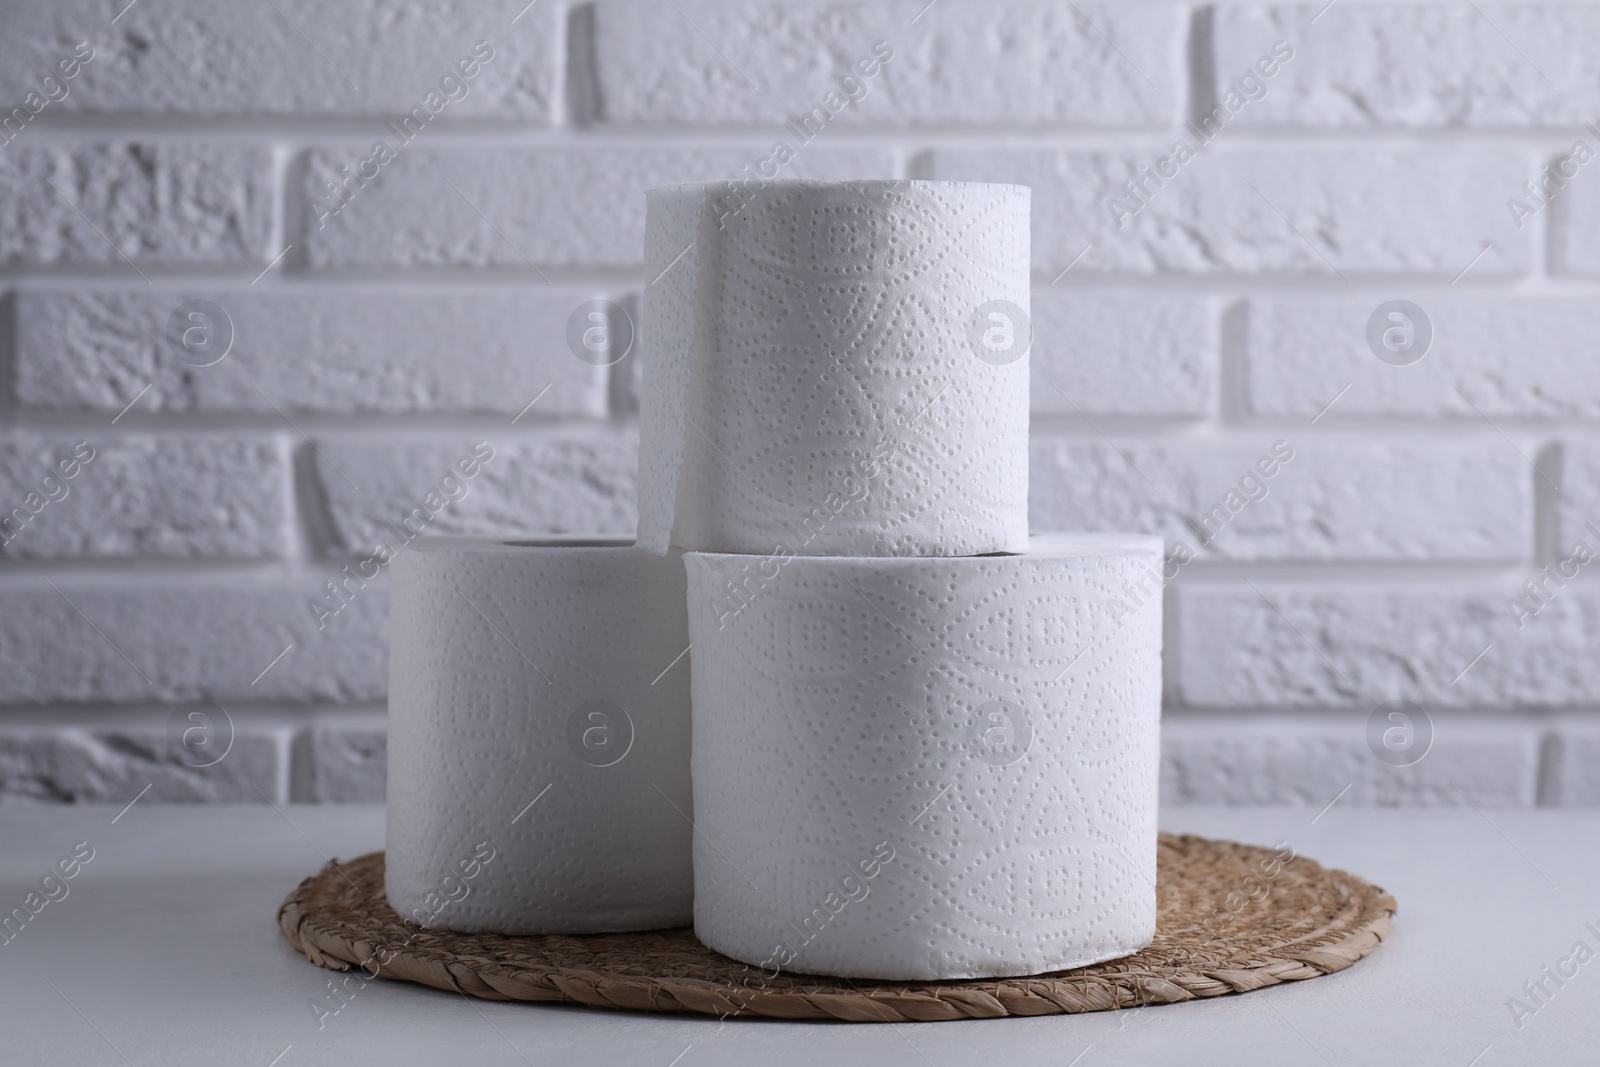 Photo of Toilet paper rolls on white table against brick wall